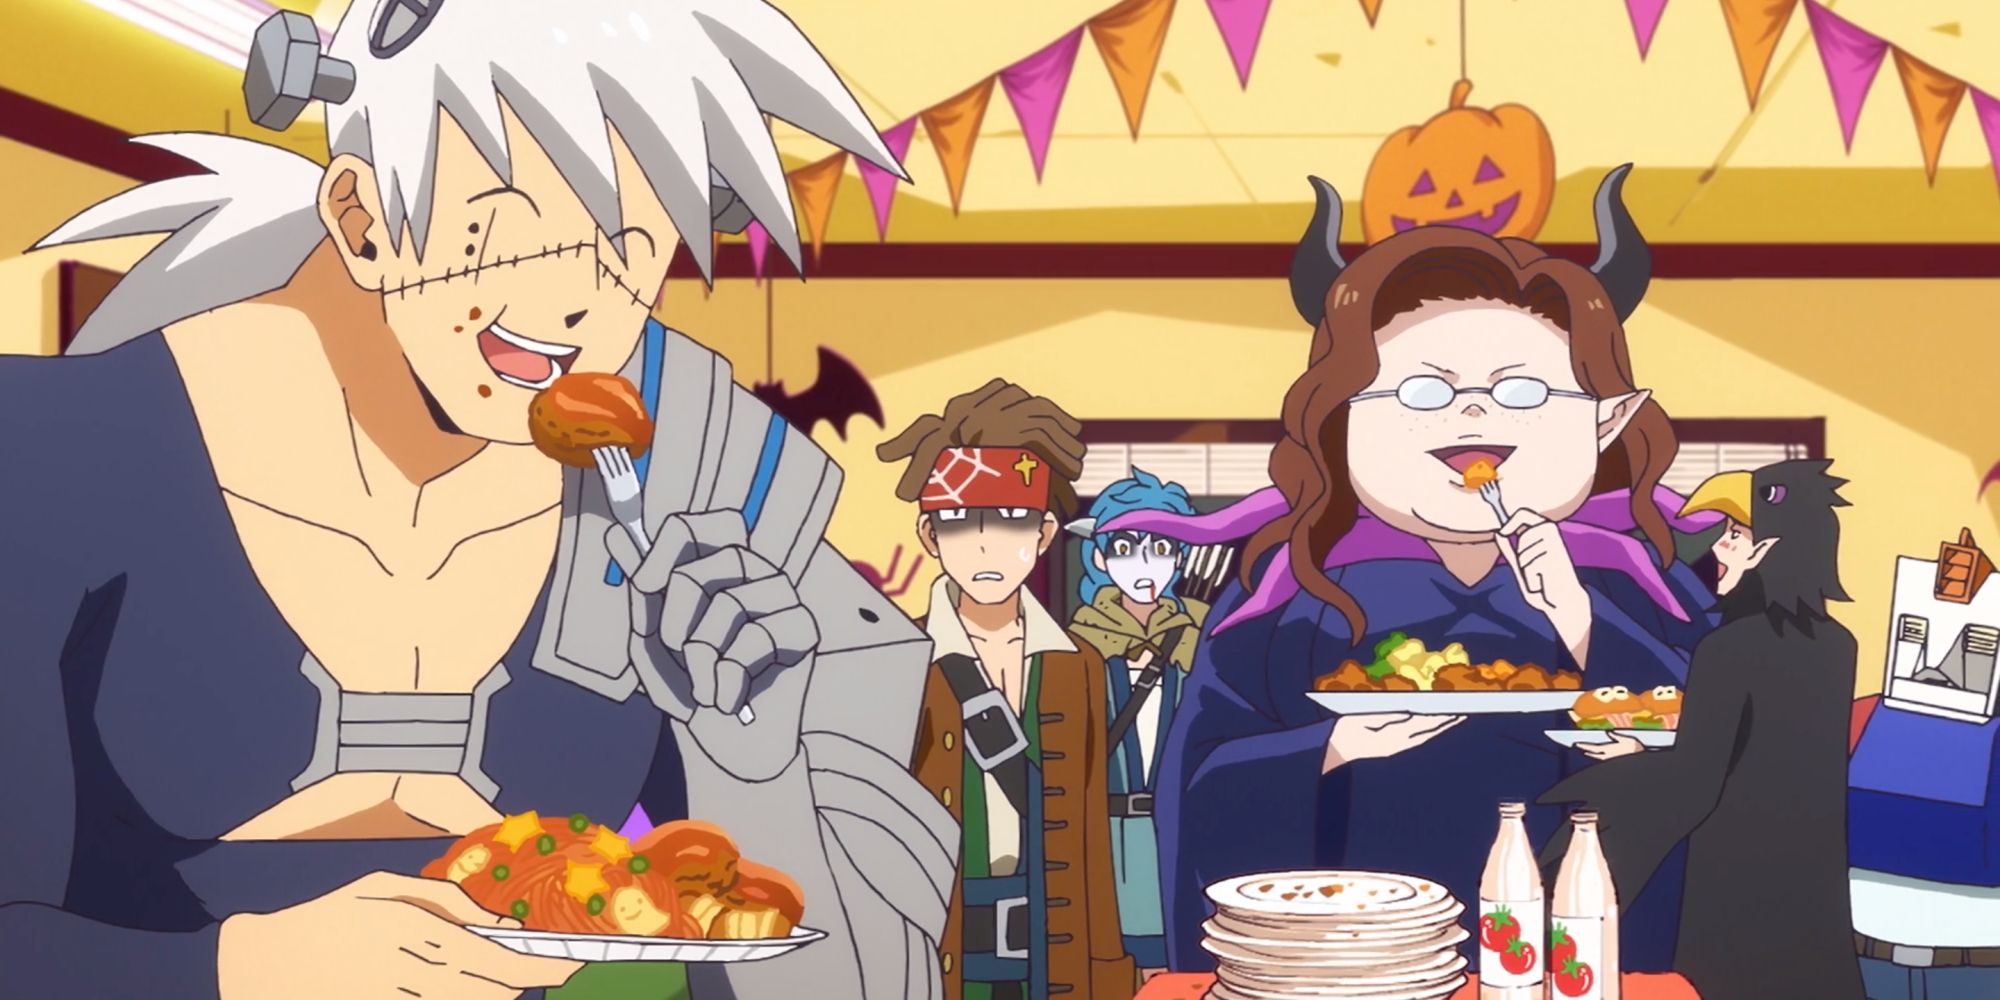 Satetsu, Gekkoin, Shot, Adam, and others celebrate at a Halloween party in The Vampire Dies in No Time.